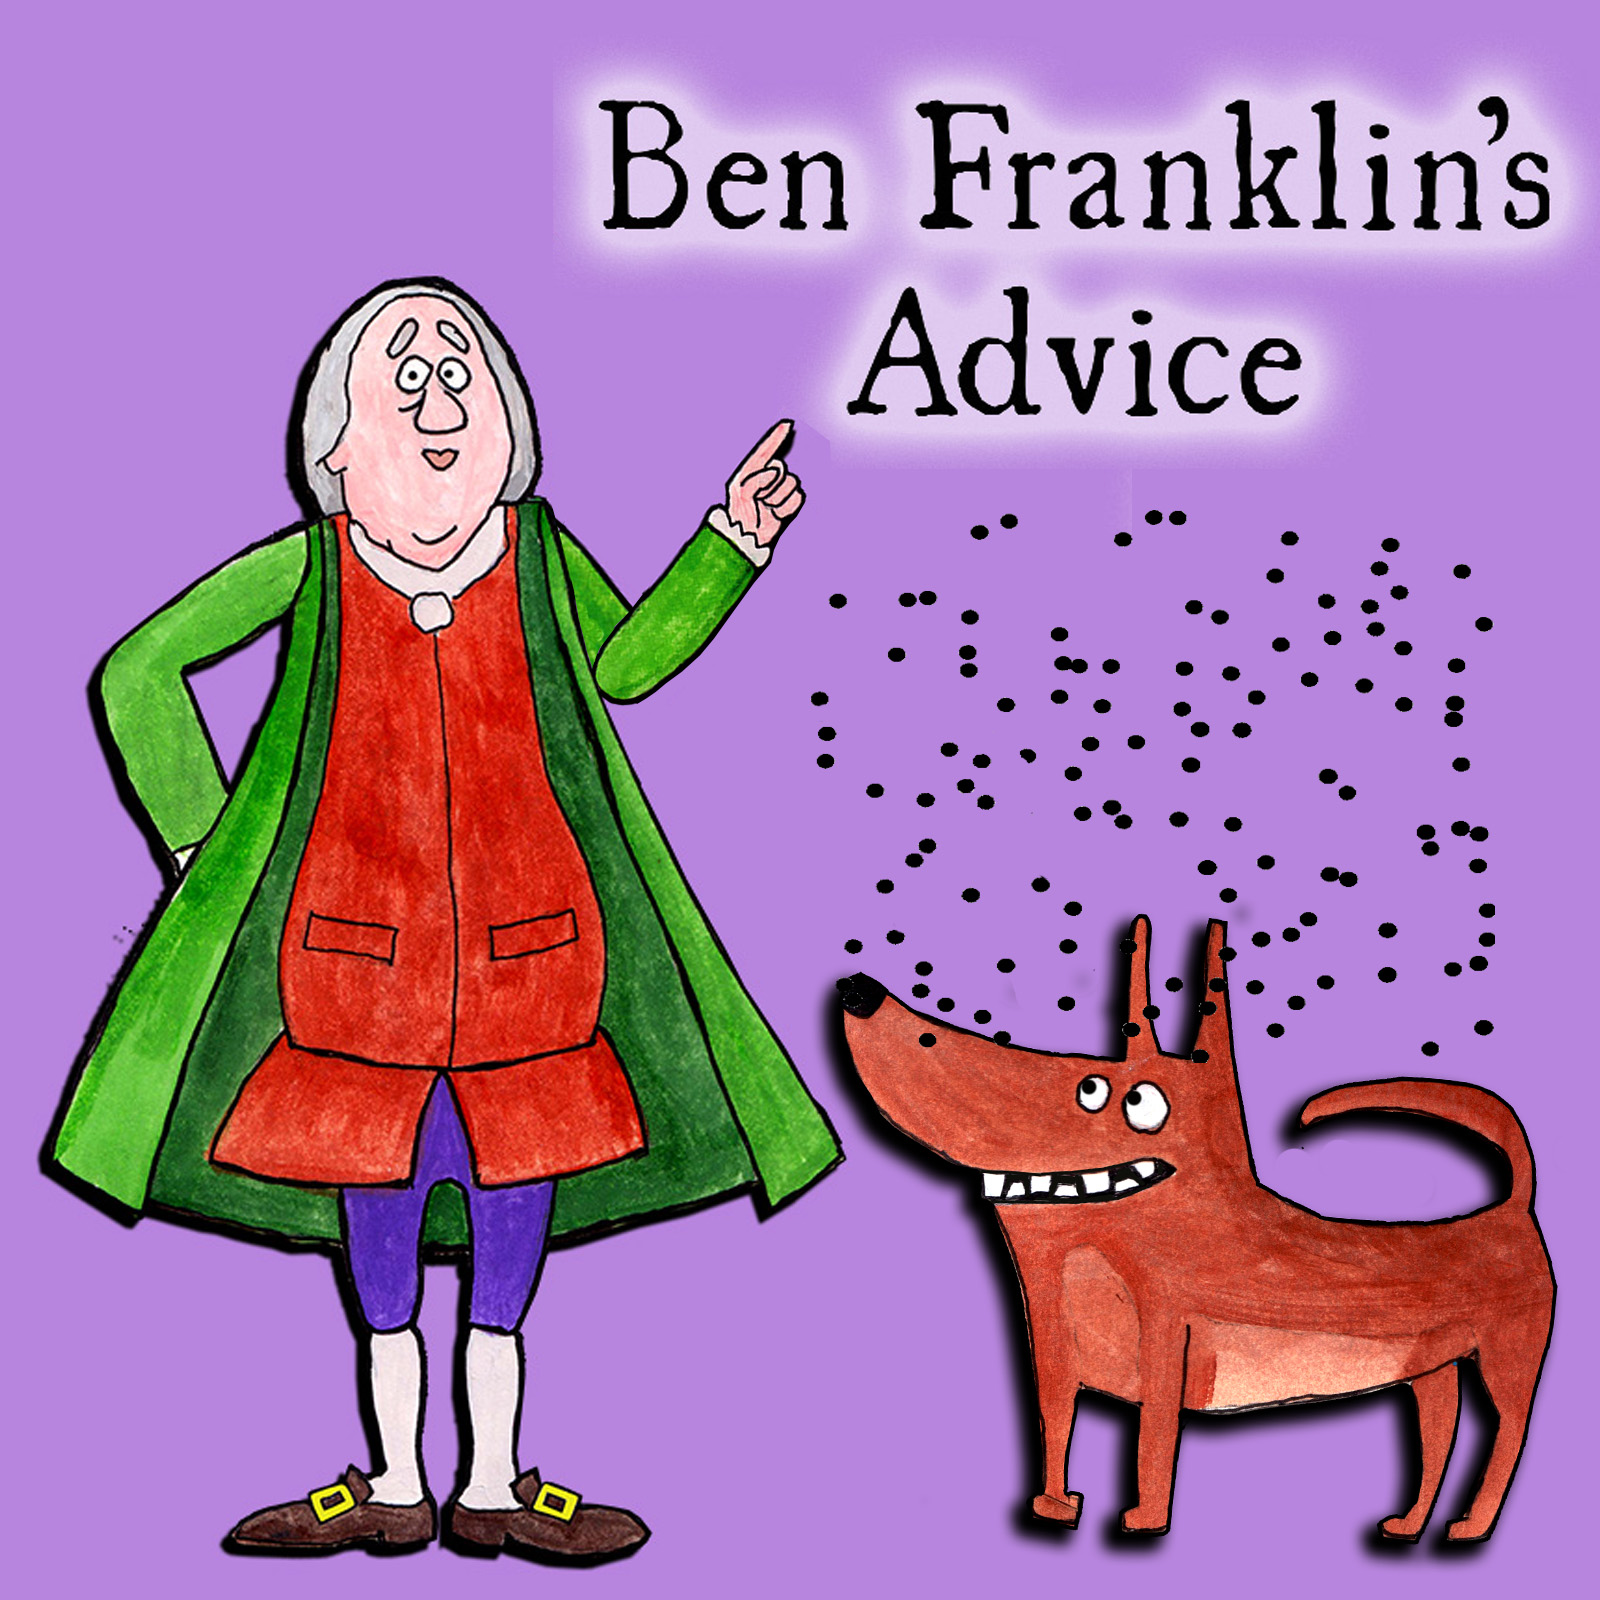 Ben Franklin with a dog with fleas